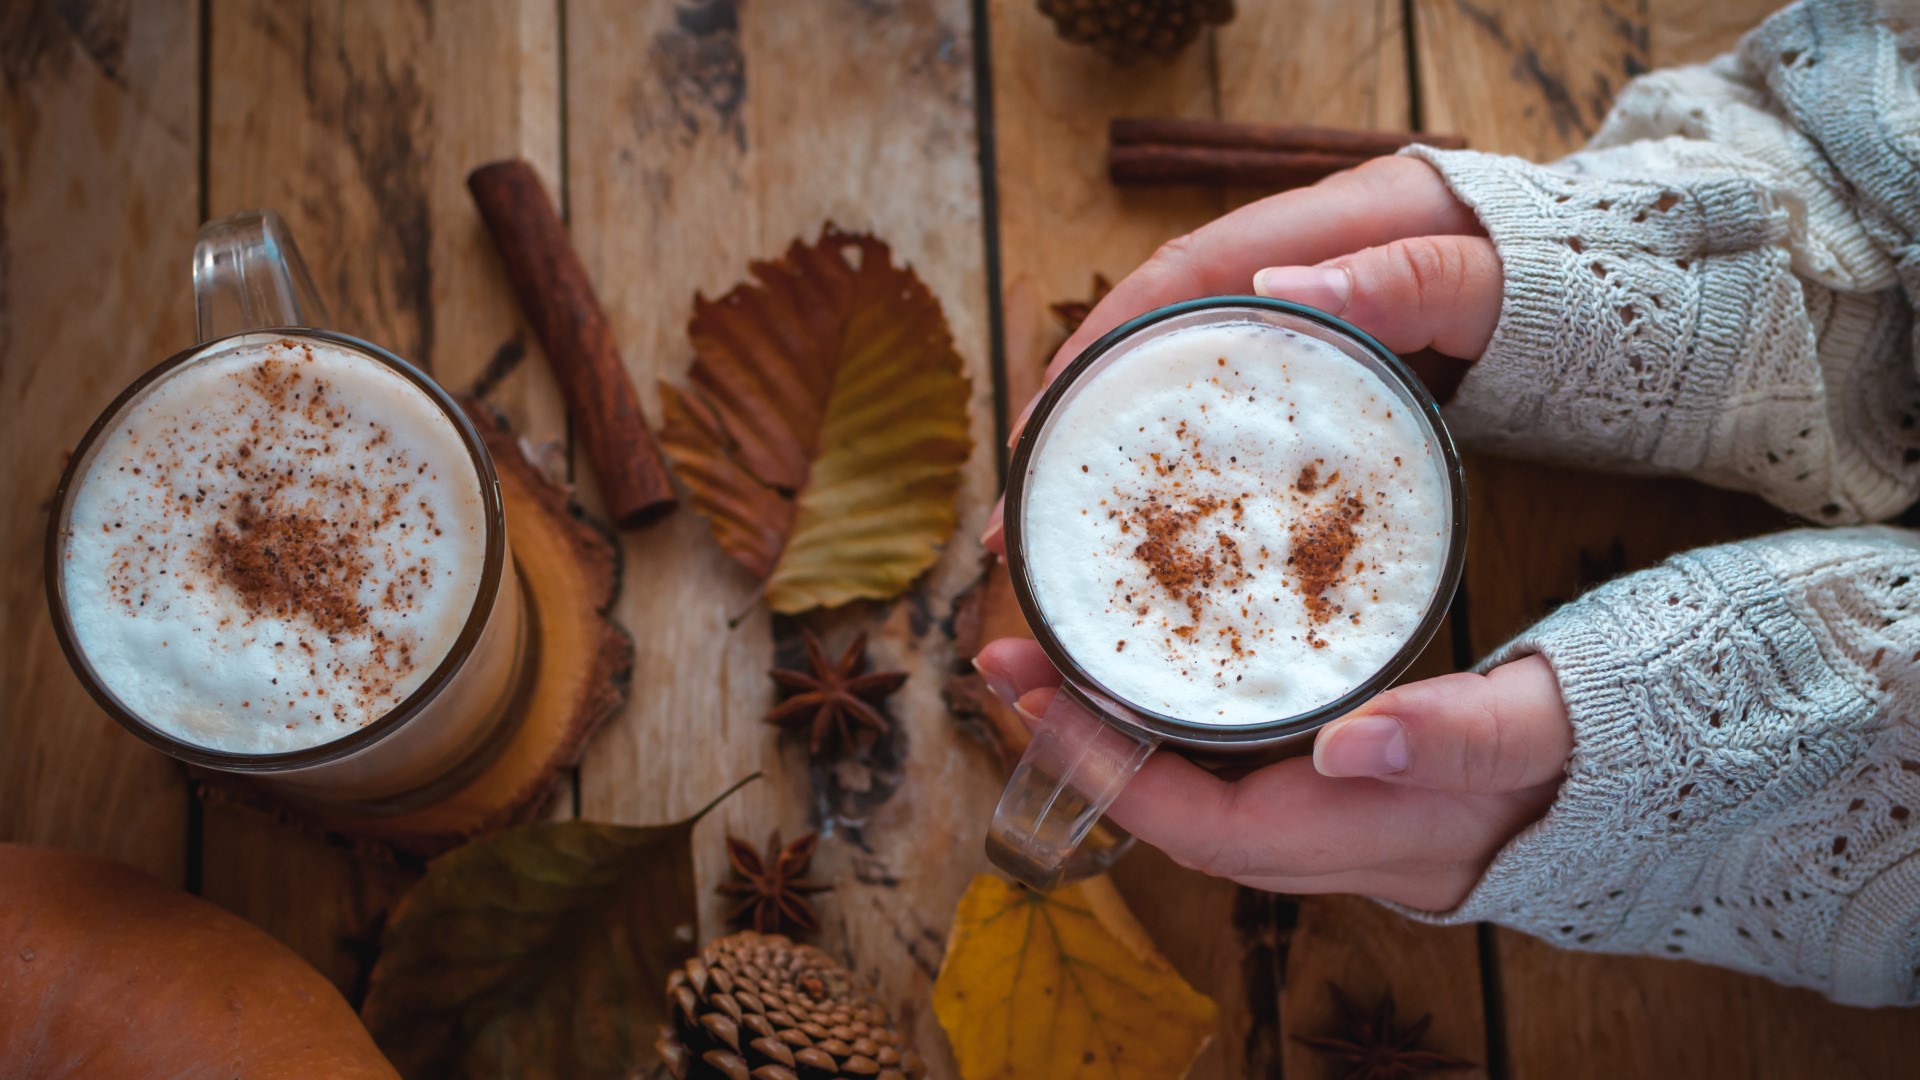 These cold temperatures making you want to snuggle up under a blanket with a warm beverage? Make a pumpkin spice latte.